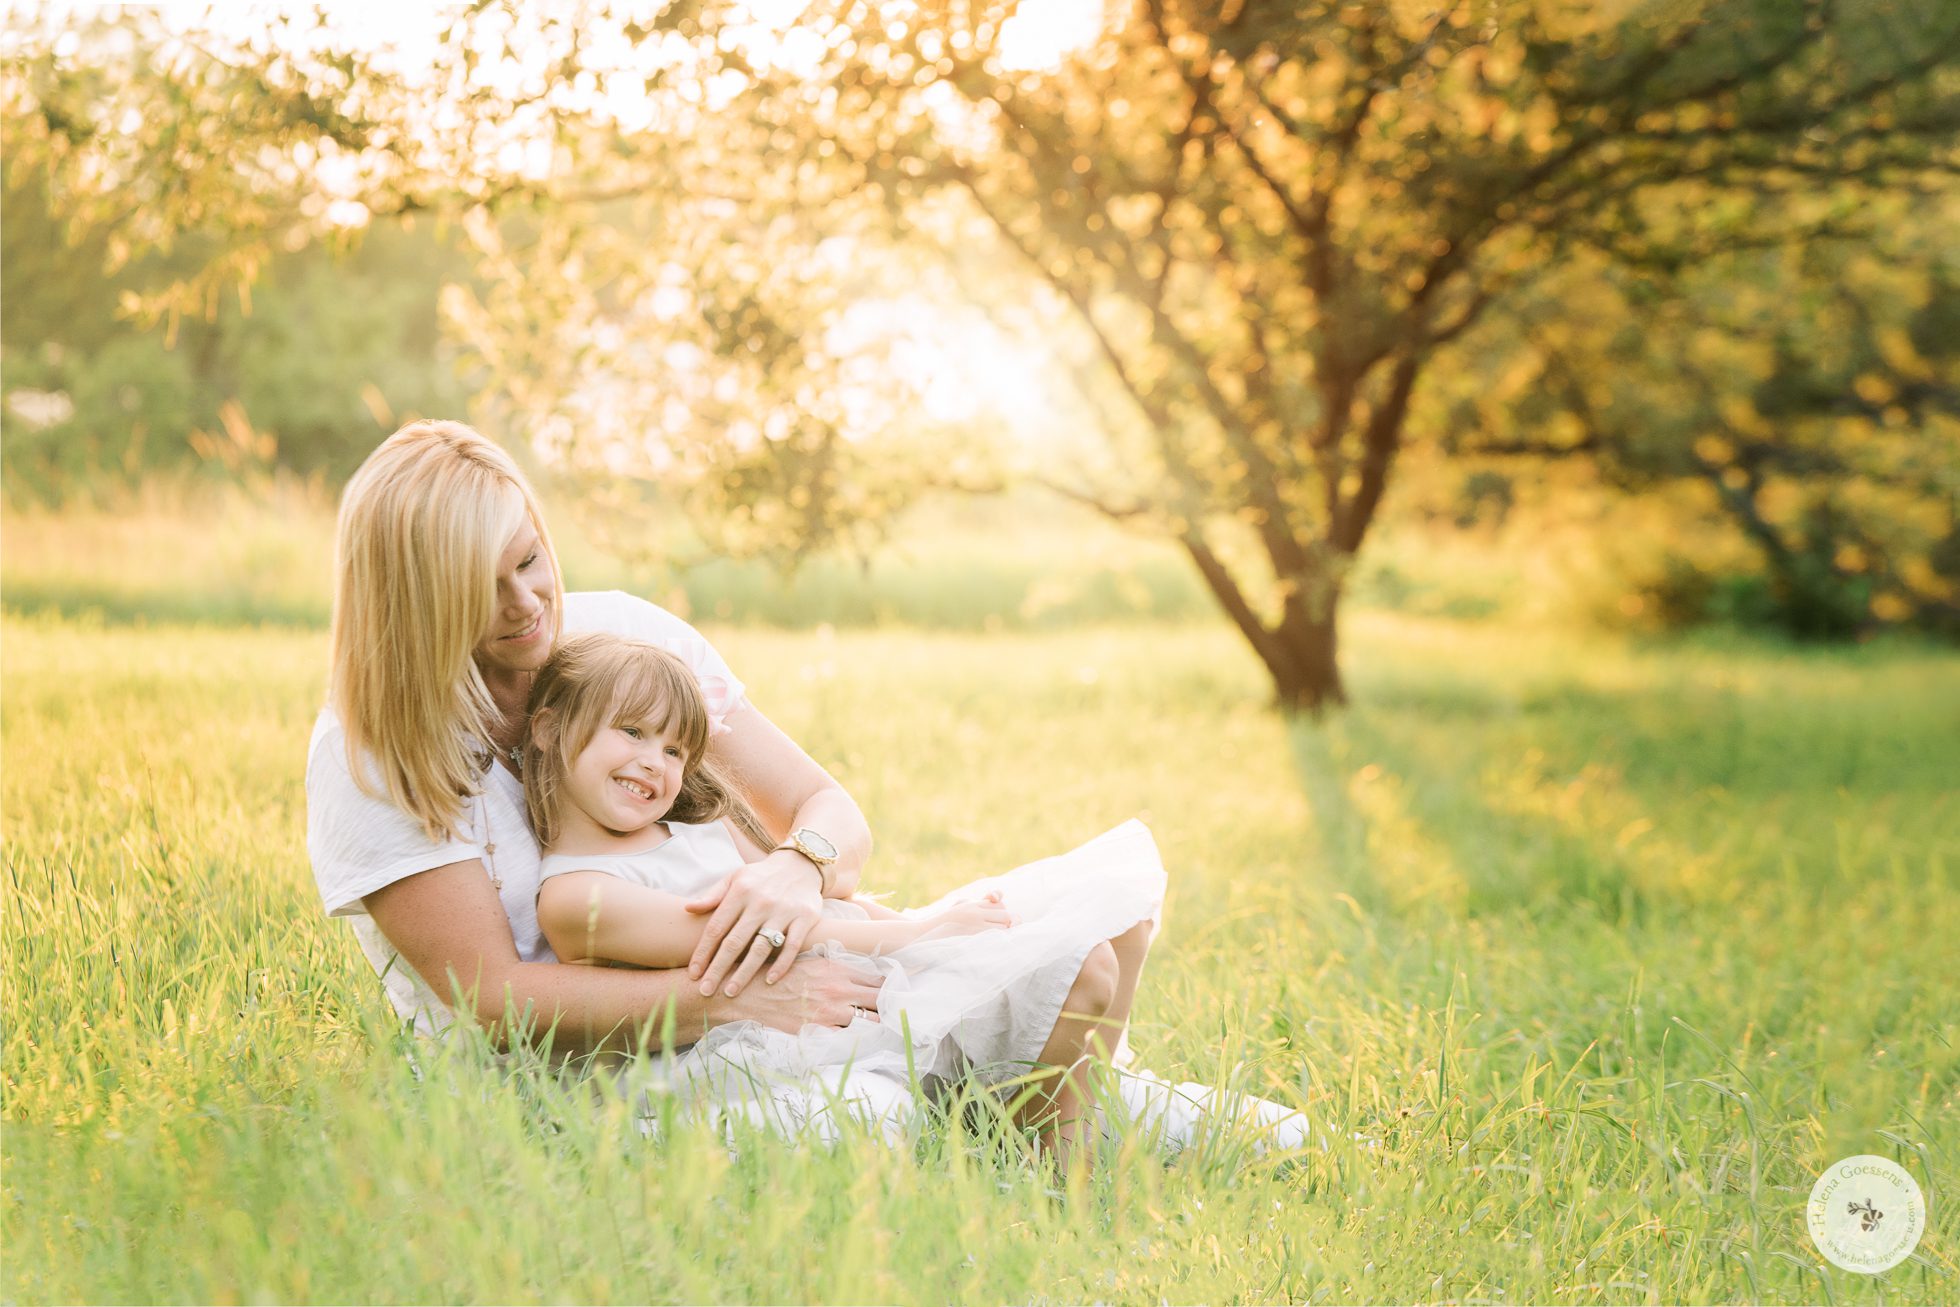 Mom and daughter sitting on the grass in a summer late afternoon. Image by Helena Goessens Photography.